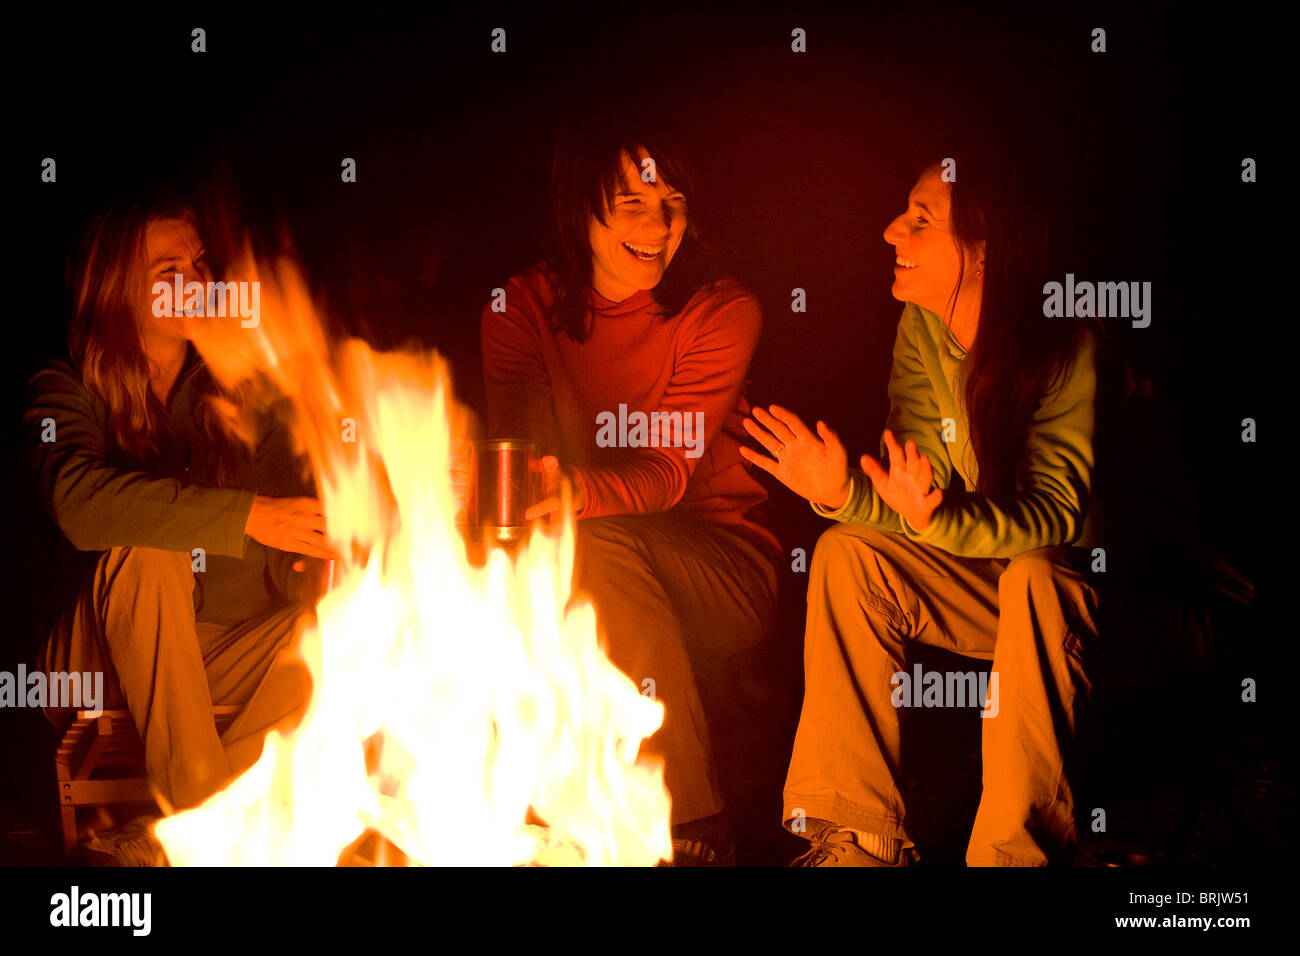 Three women talk and laugh together around a campfire. Stock Photo